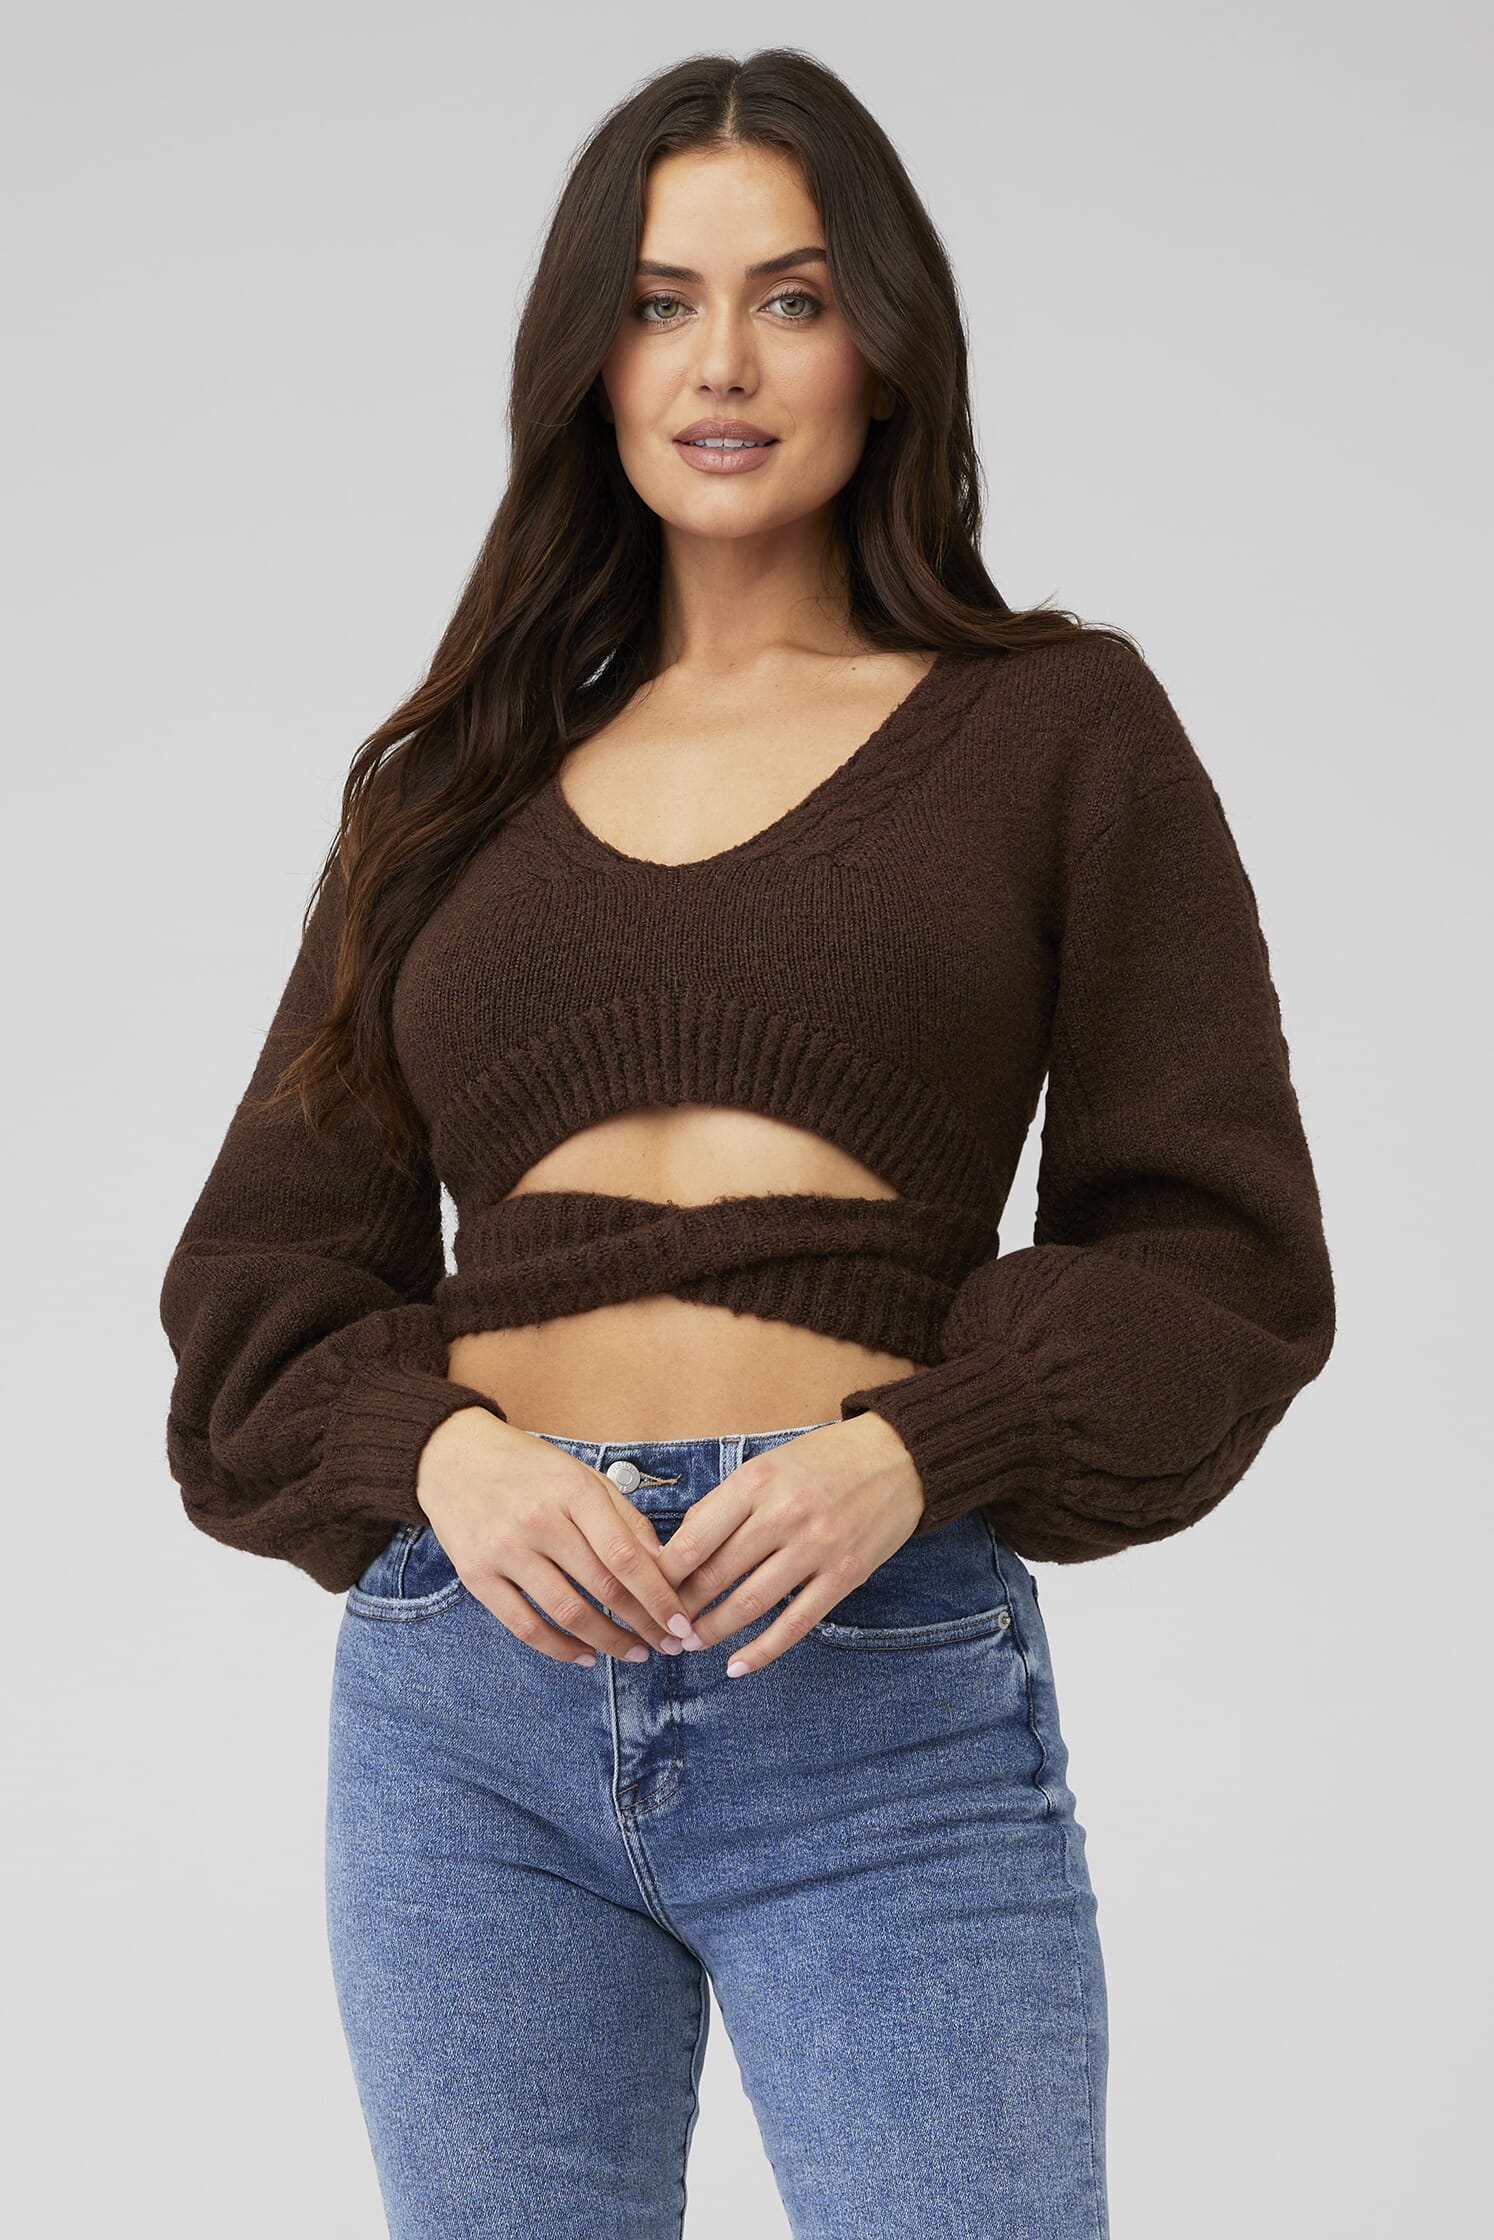 https://images.fashionpass.com/products/amelia-crop-sweater-for-love-and-lemons-brown-84c-1.jpg?profile=a